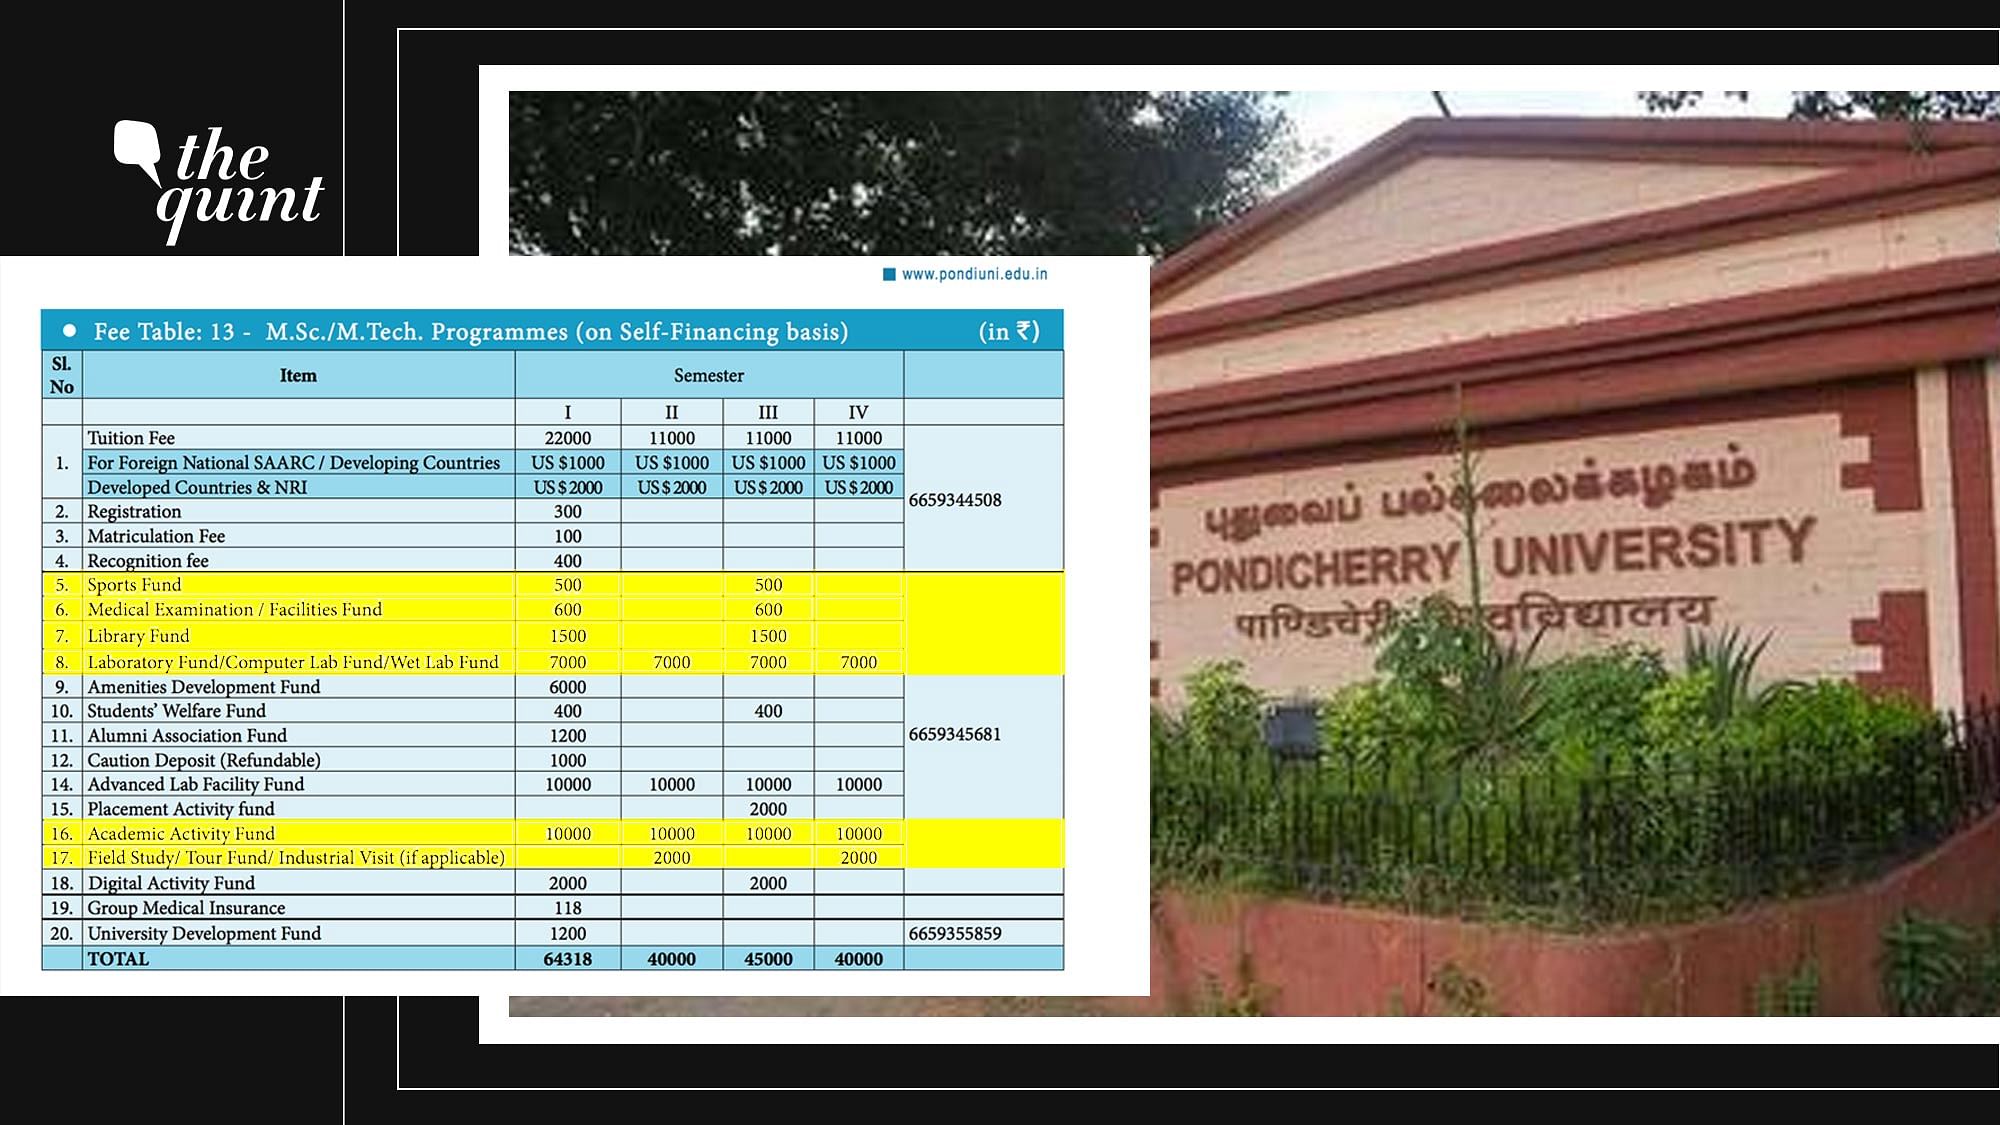 Students of Pondicherry University have demanded that the management rework the fee structure.